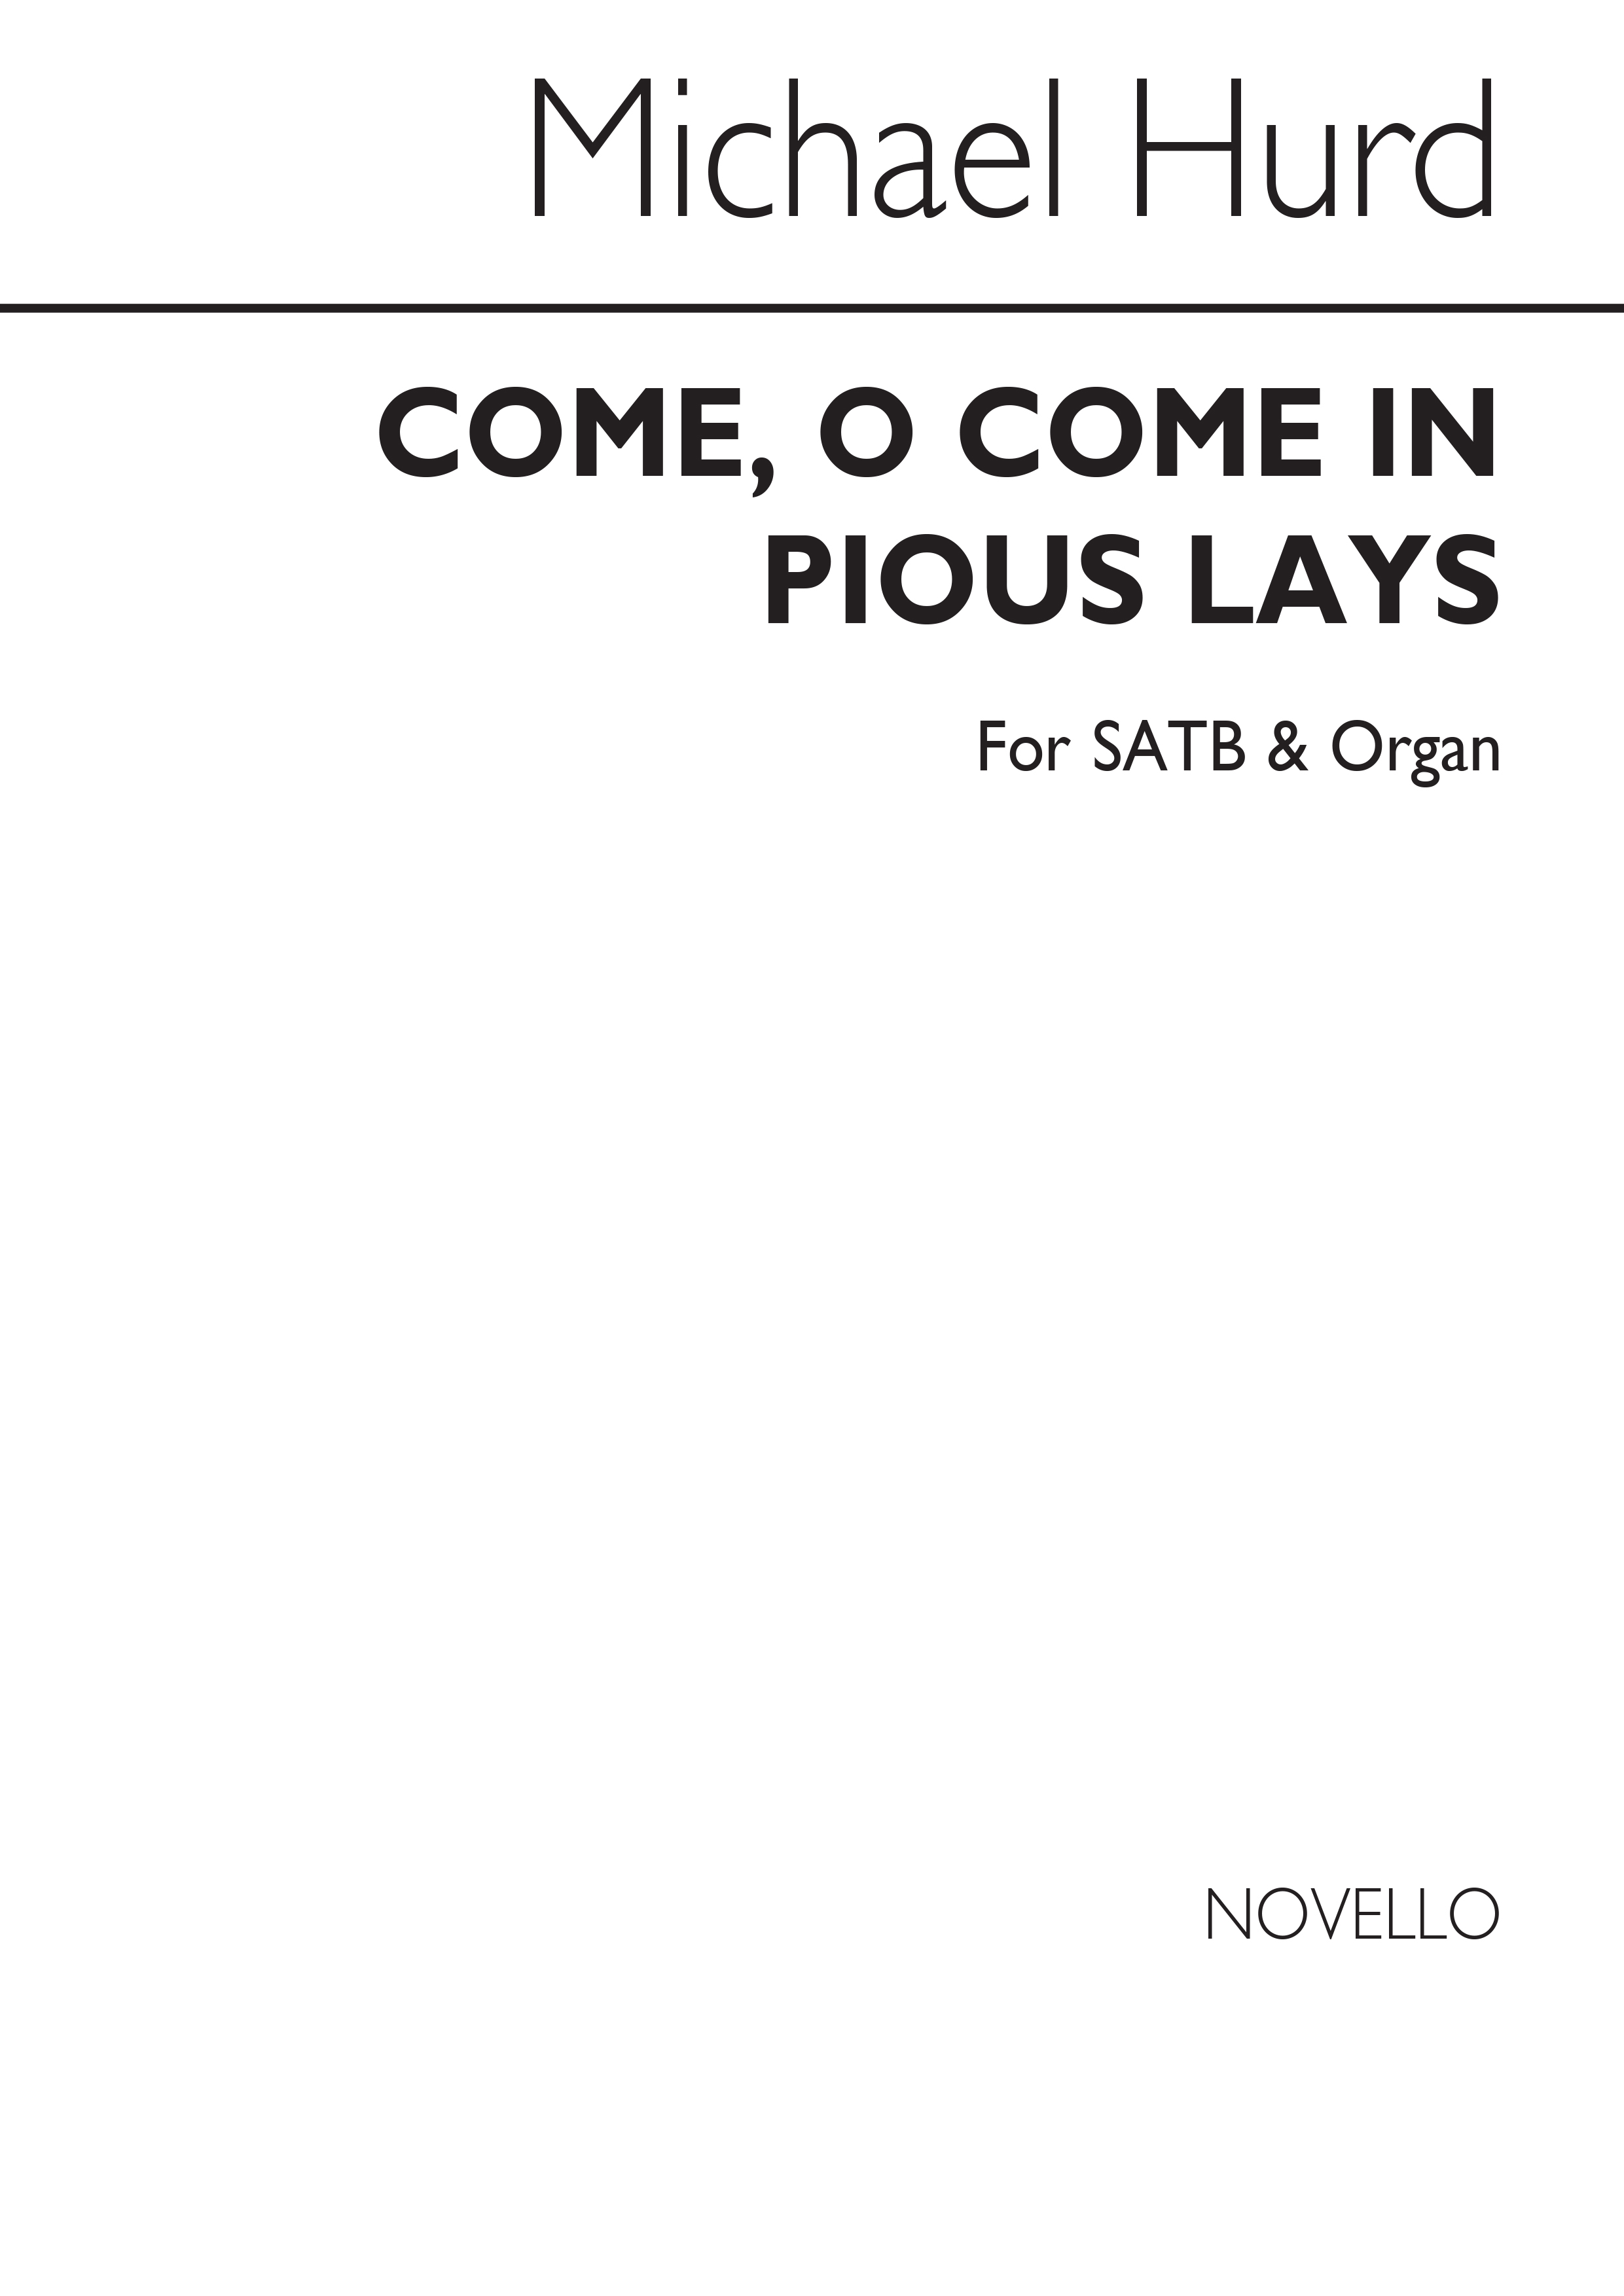 Hurd: Come O Come In Pious Lays for SATB and Organ